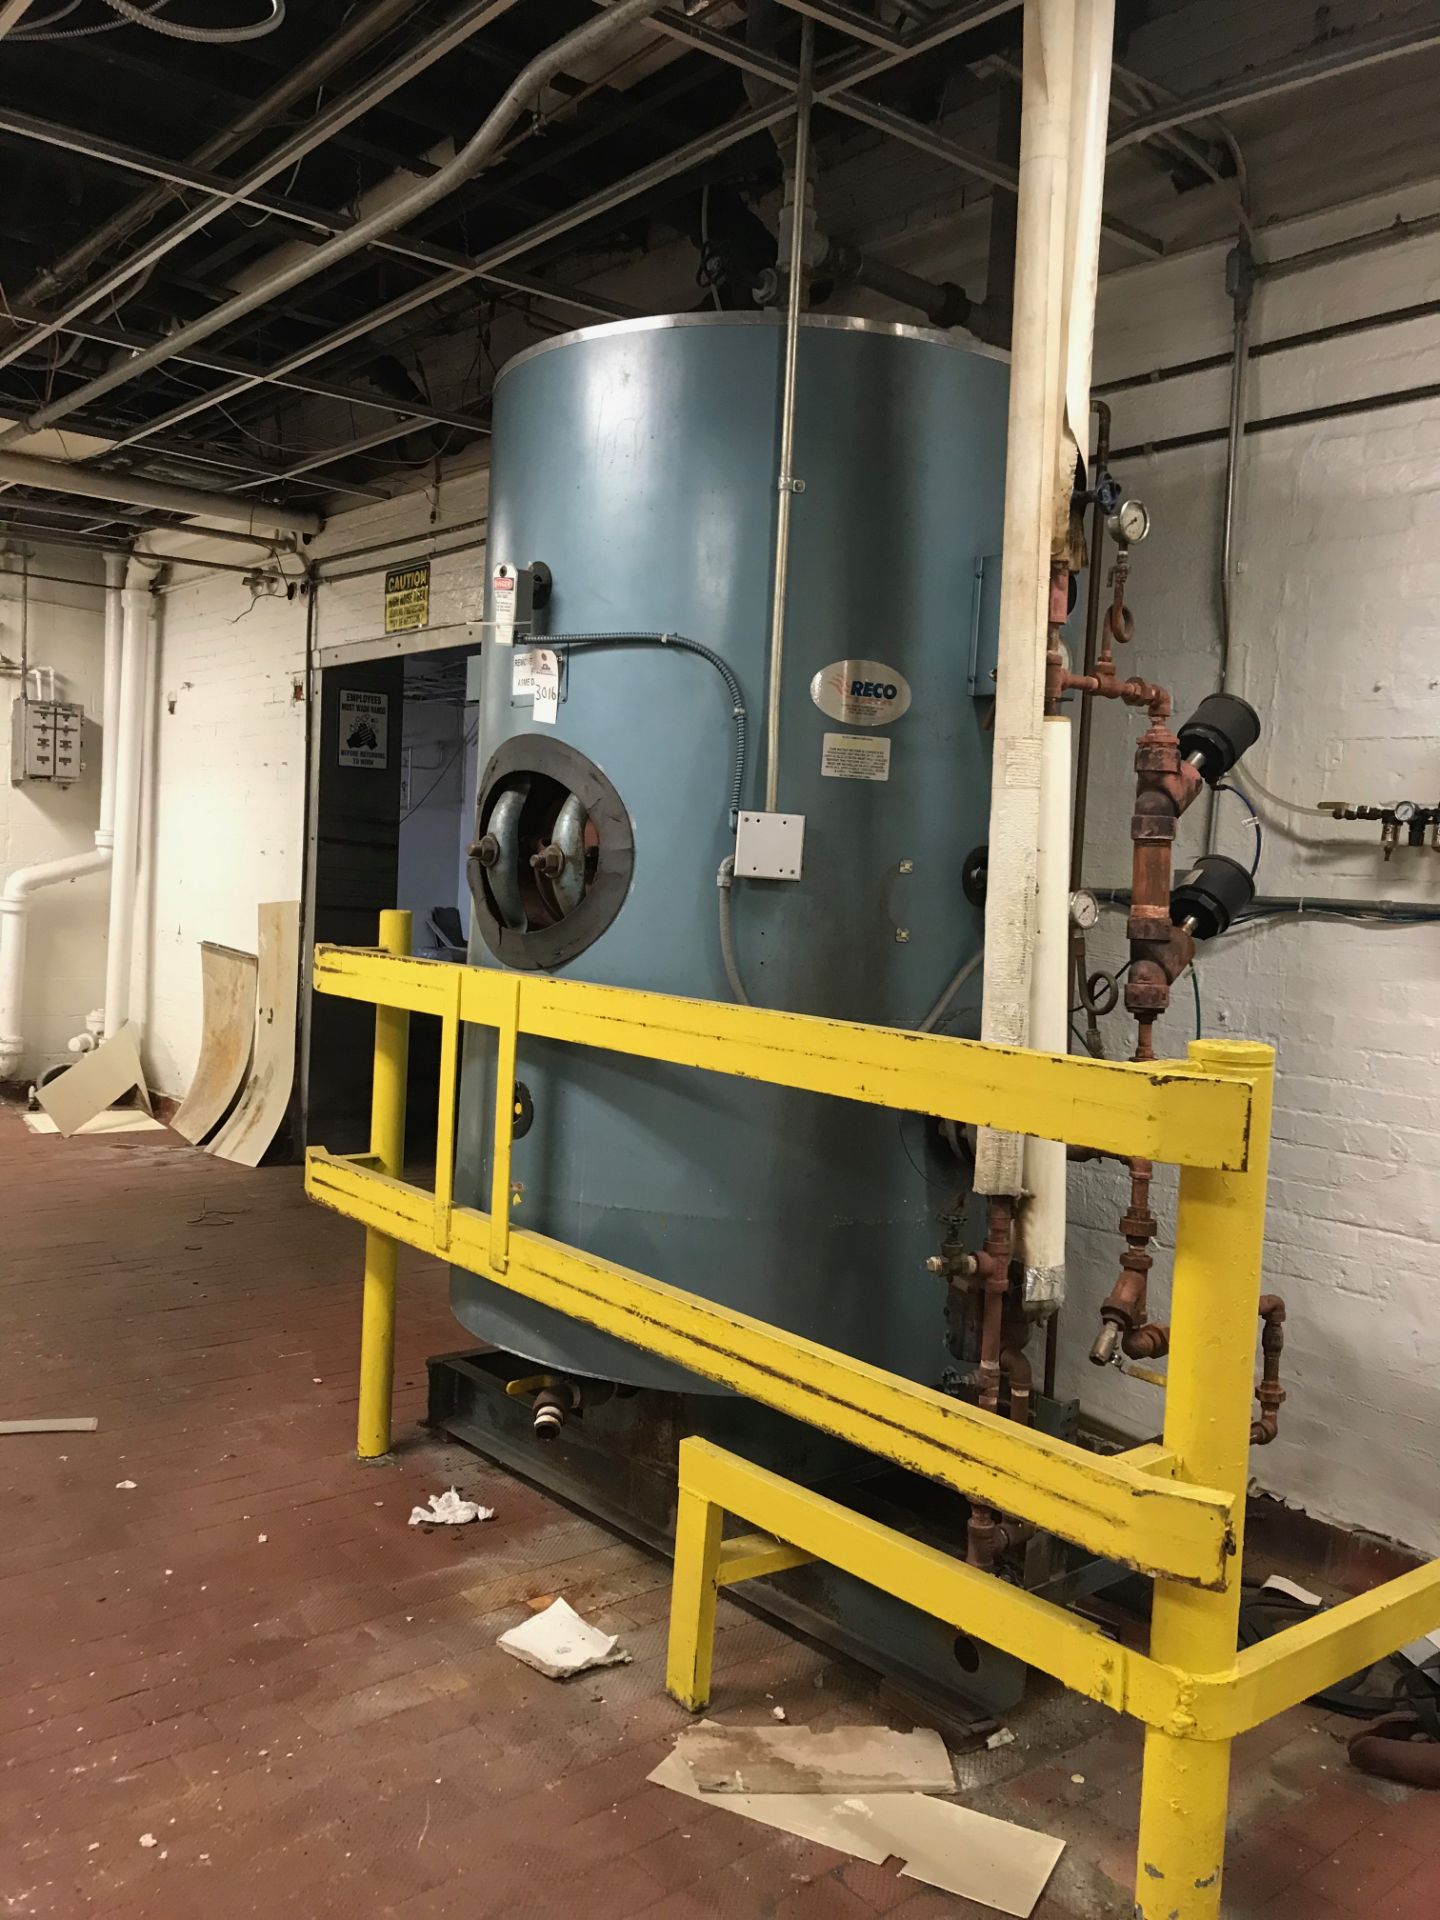 Reco Hot Water Heater | Reqd Rig: See Desc